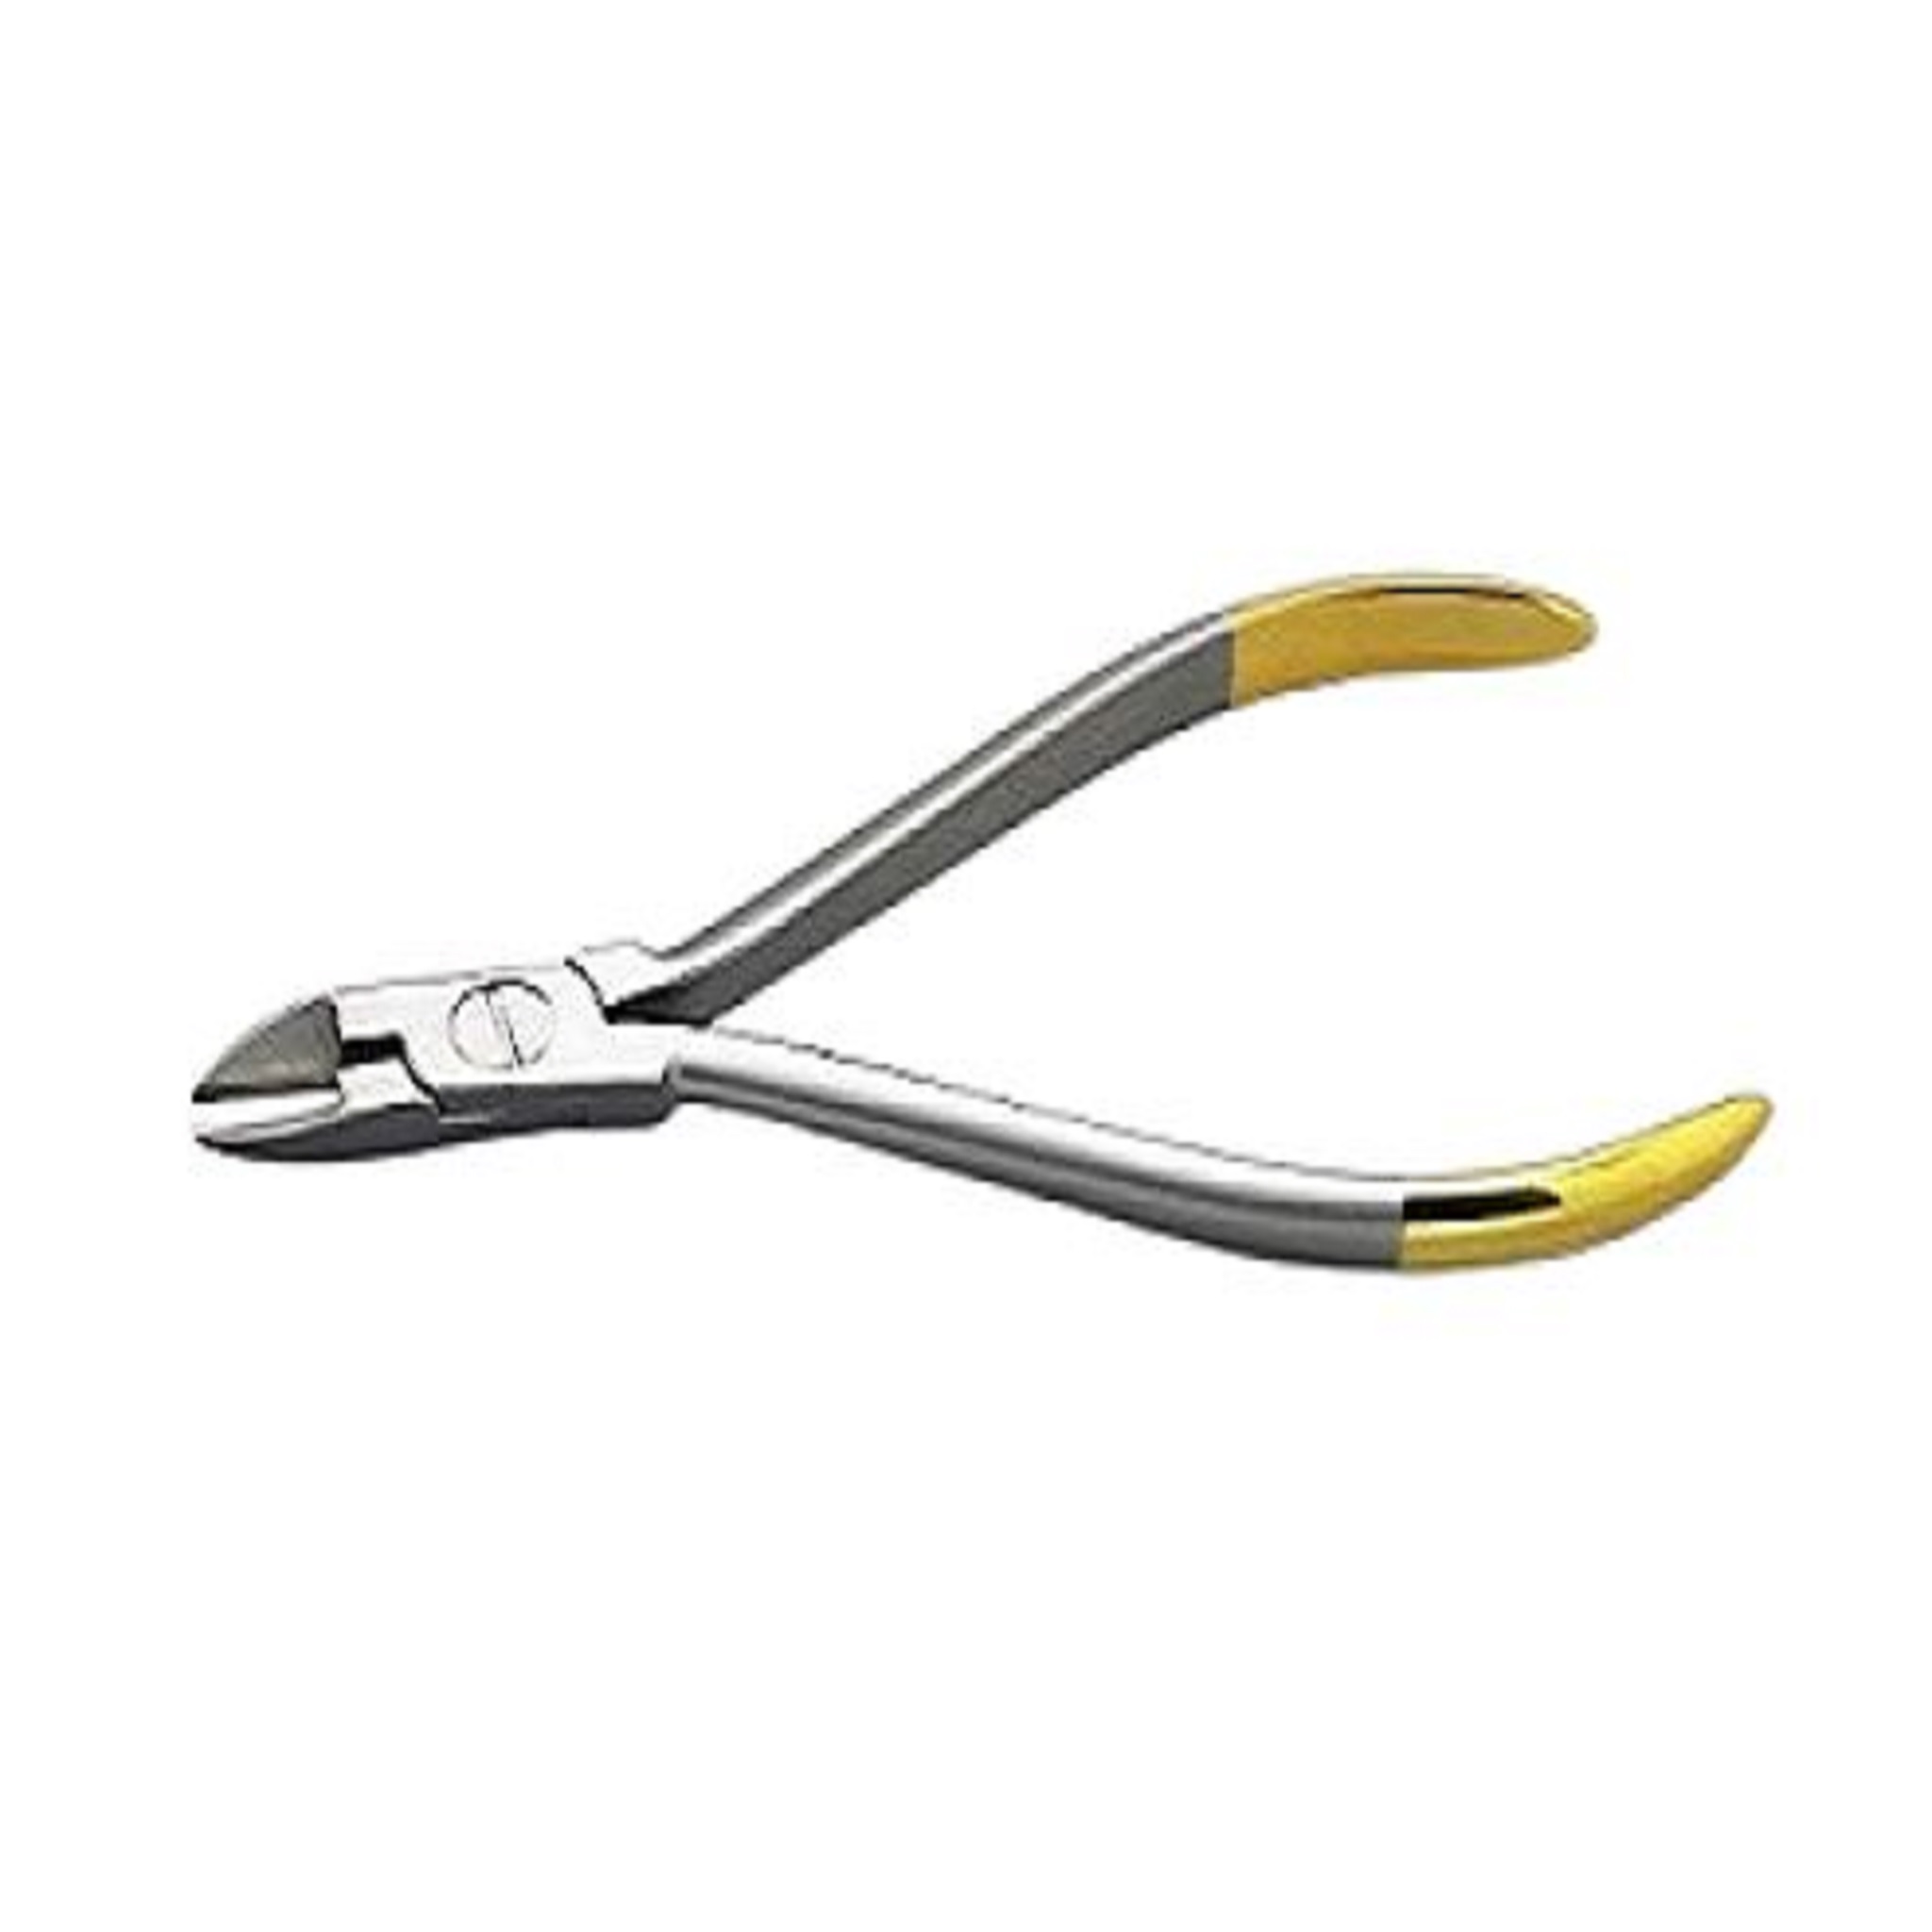 Hard Wire Cutter Orthodontic Ortho Dental